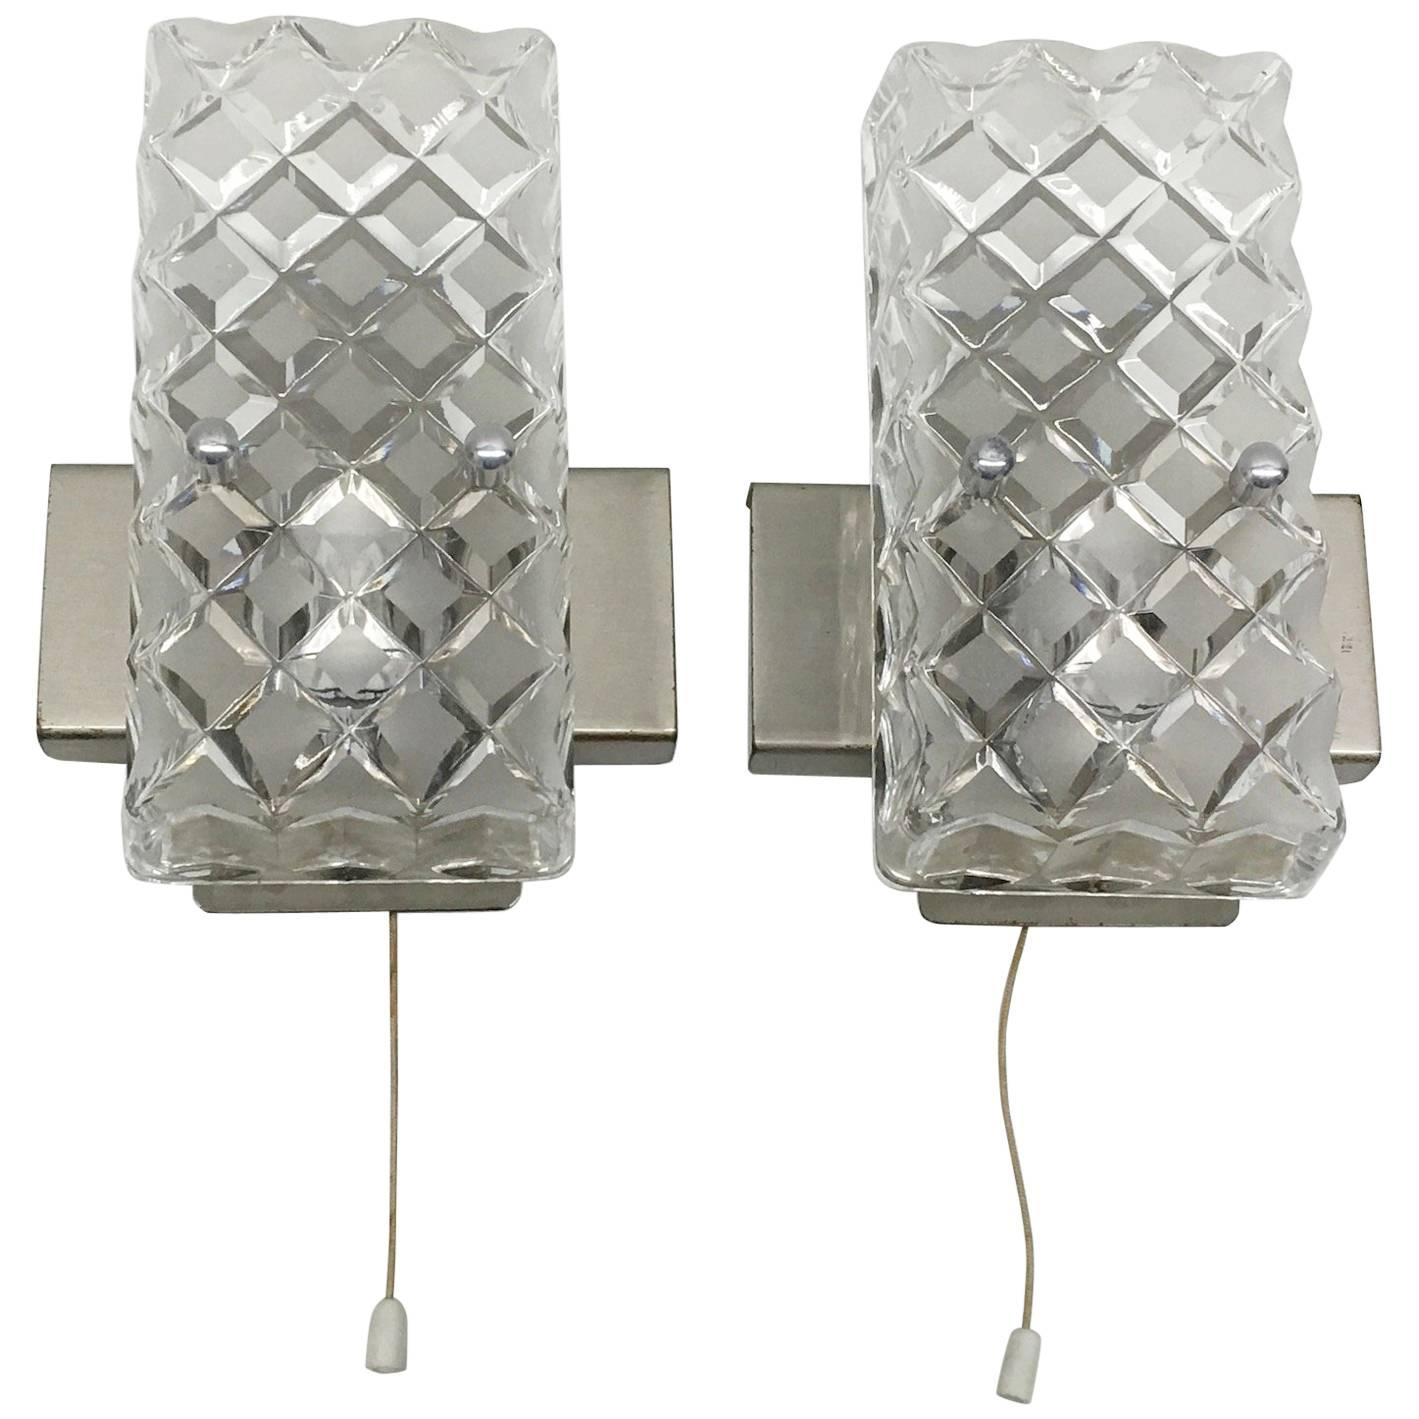 Pair of German Rectangular Glass Sconces with Chrome Fixture 1970's For Sale